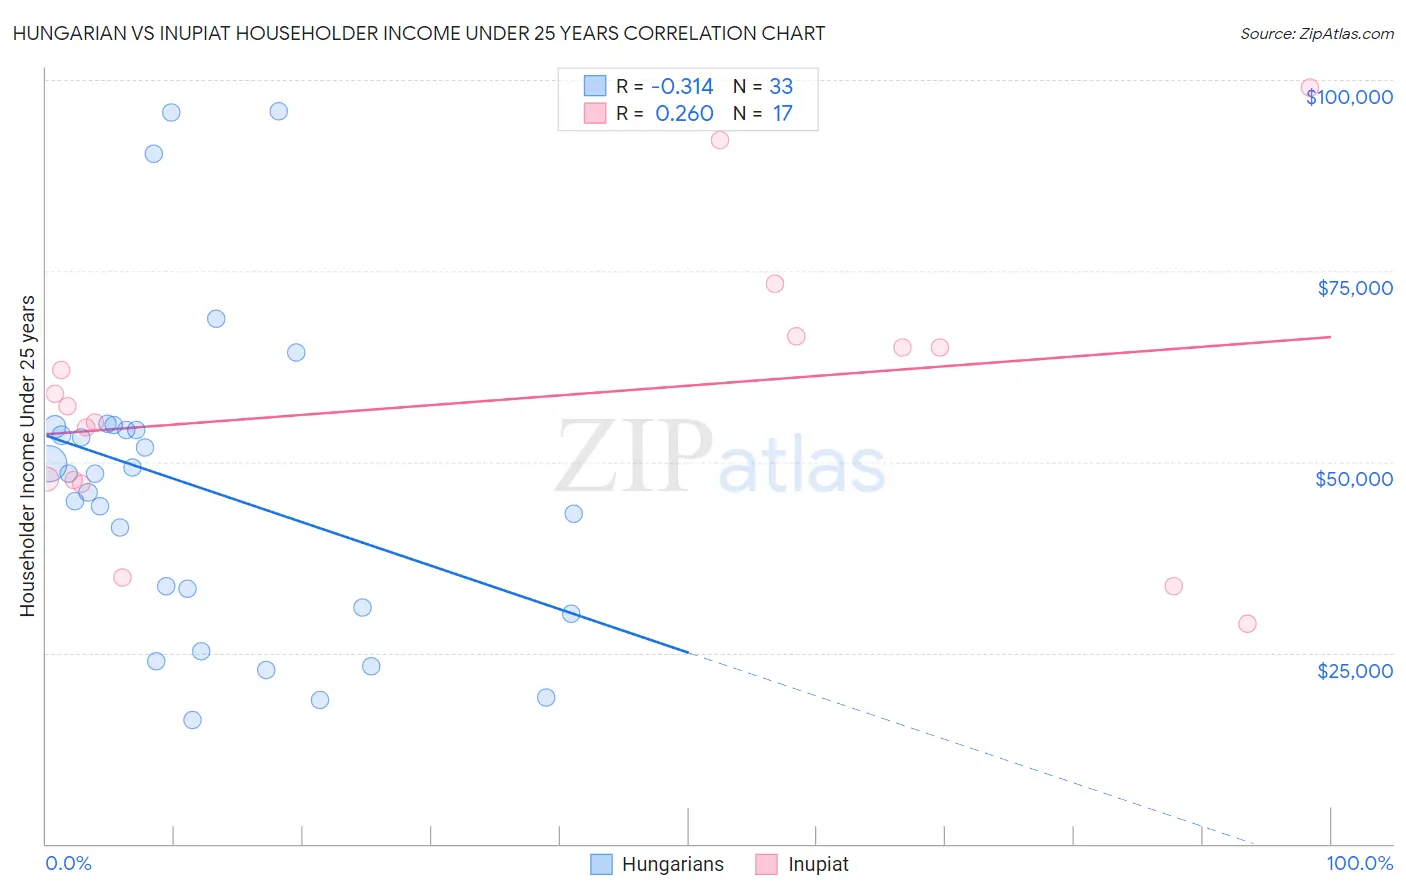 Hungarian vs Inupiat Householder Income Under 25 years